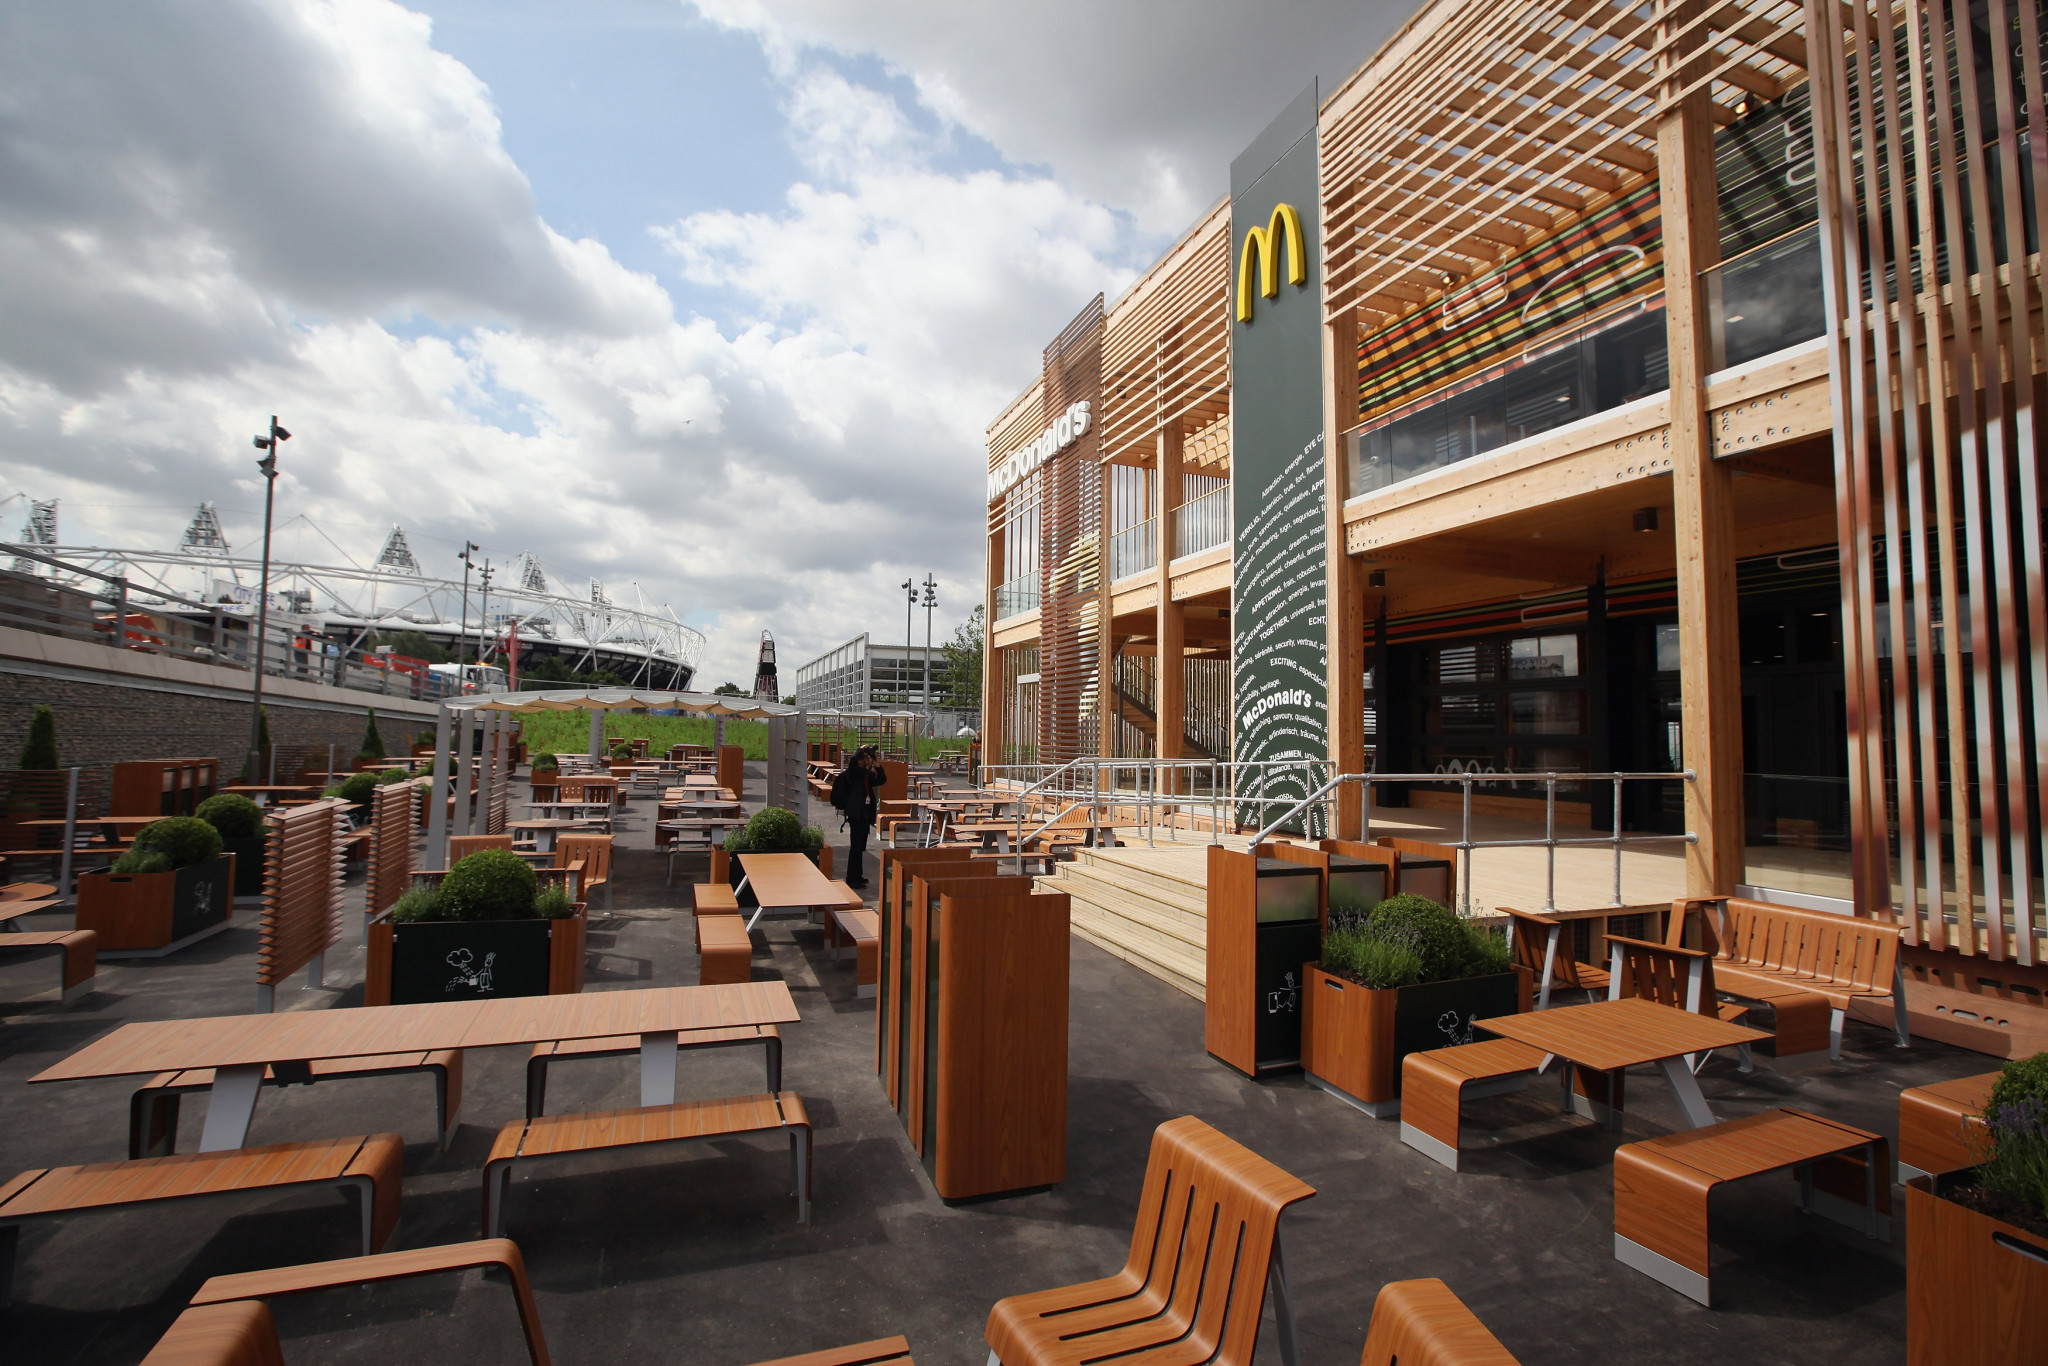 McDonald's ended their long-term partnership with the IOC earlier this year ©Getty Images